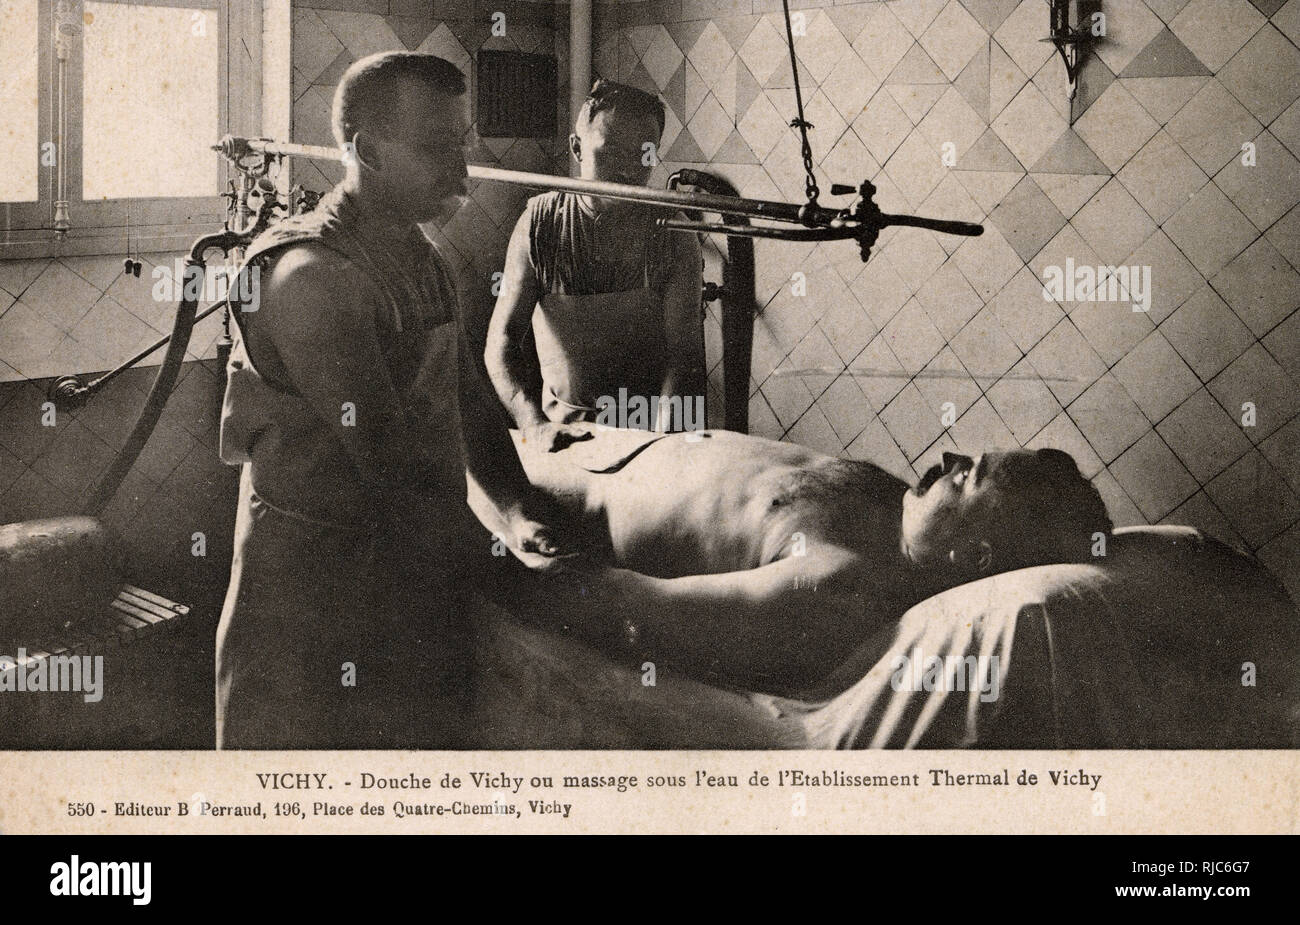 Vichy, France - Thermal Baths - Water Massage. The male attendant in the foreground appears to be checking his patient's pulse - one hopes the water jets did not have an adverse effect... Stock Photo